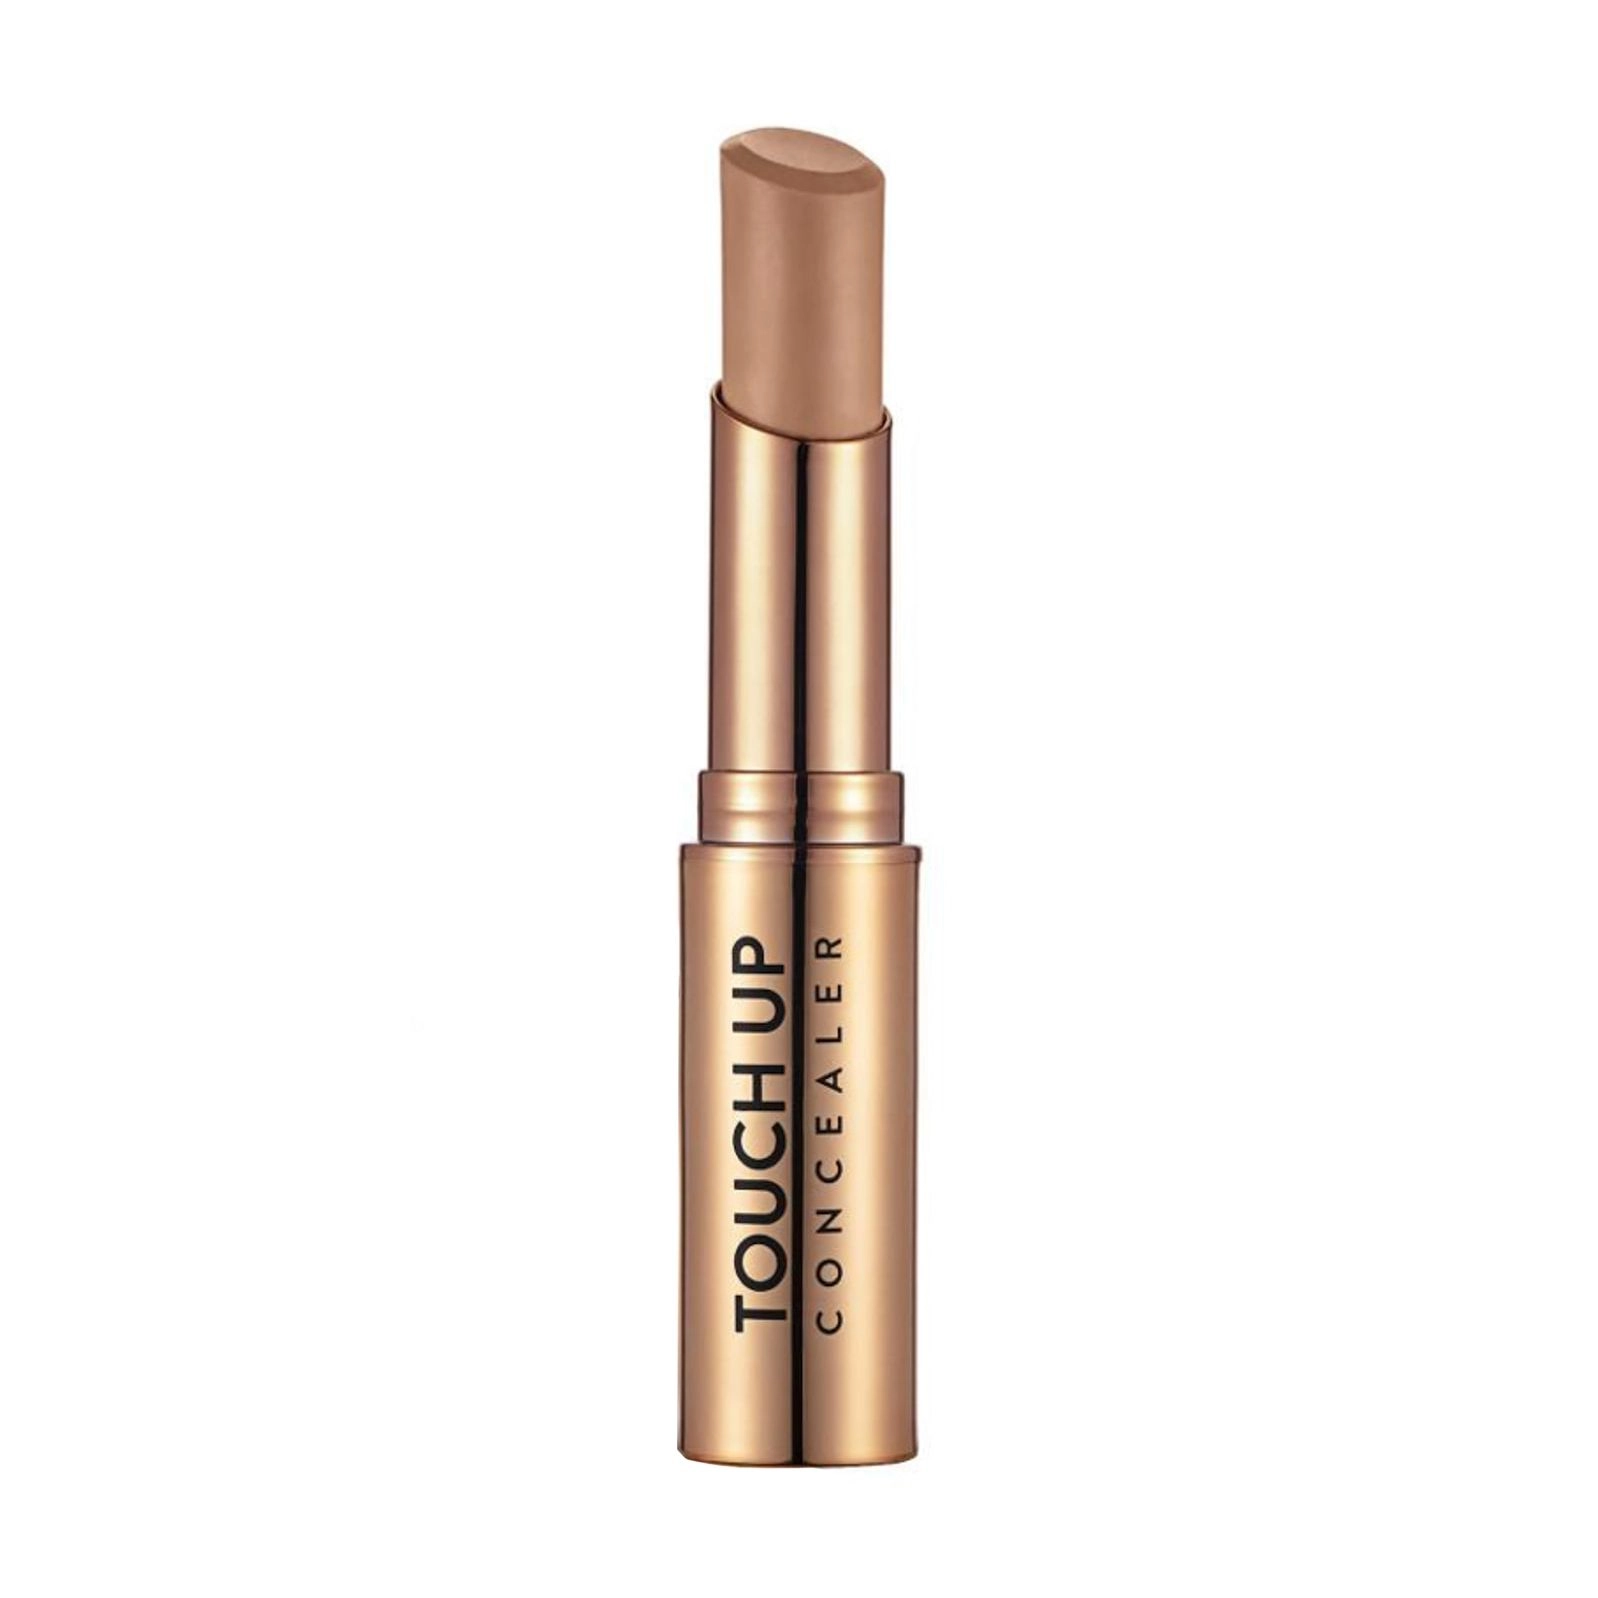 Flormar Консилер-стик для лица Touch Up Concealer 020 Ivory, 3.5 г - фото N1